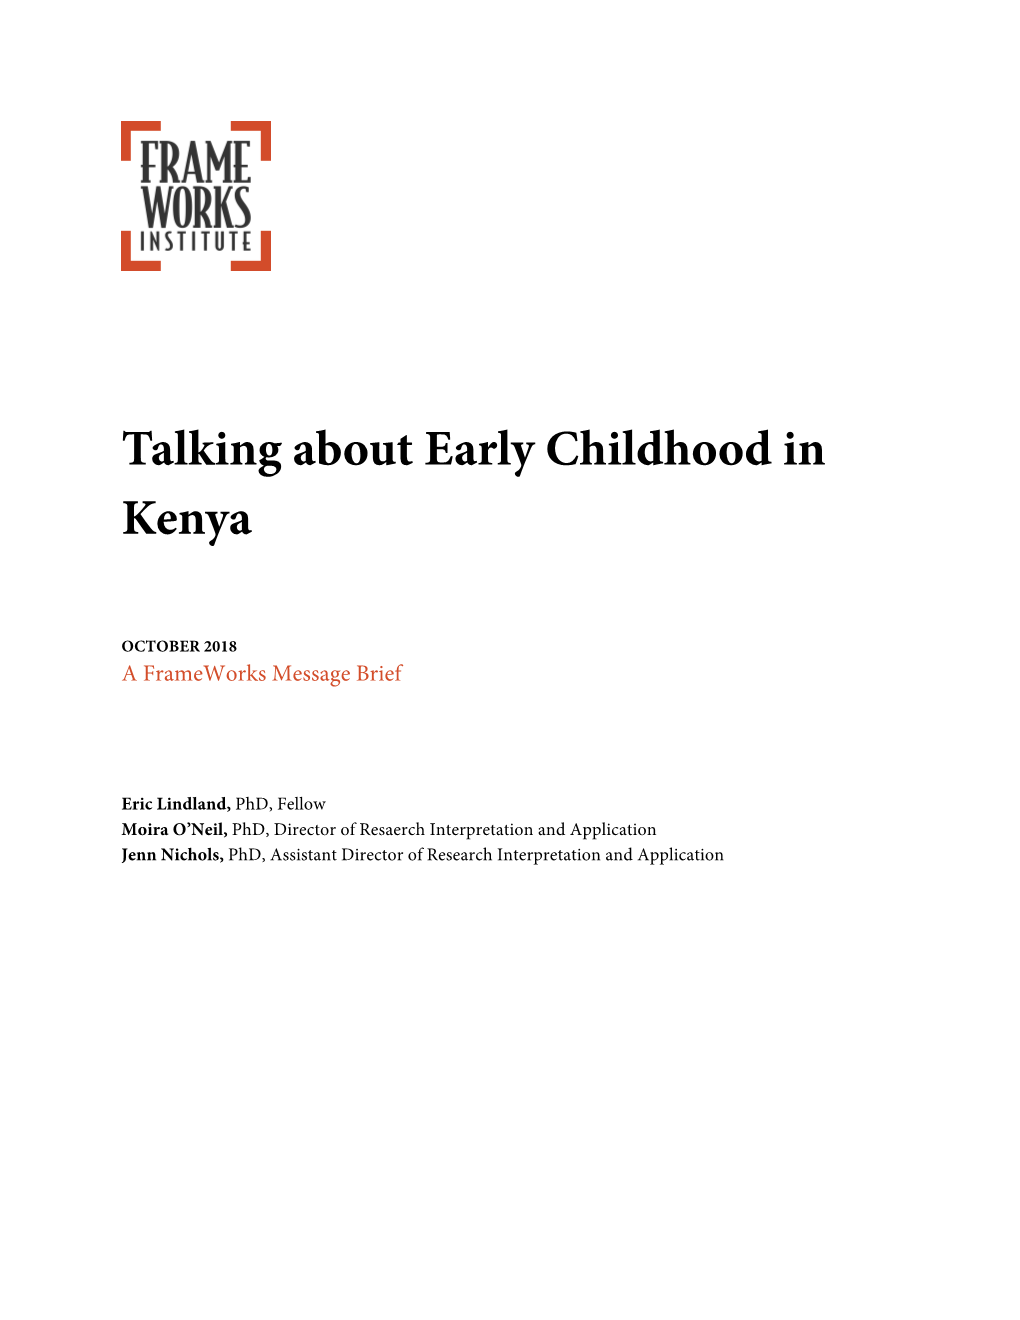 Talking About Early Childhood in Kenya